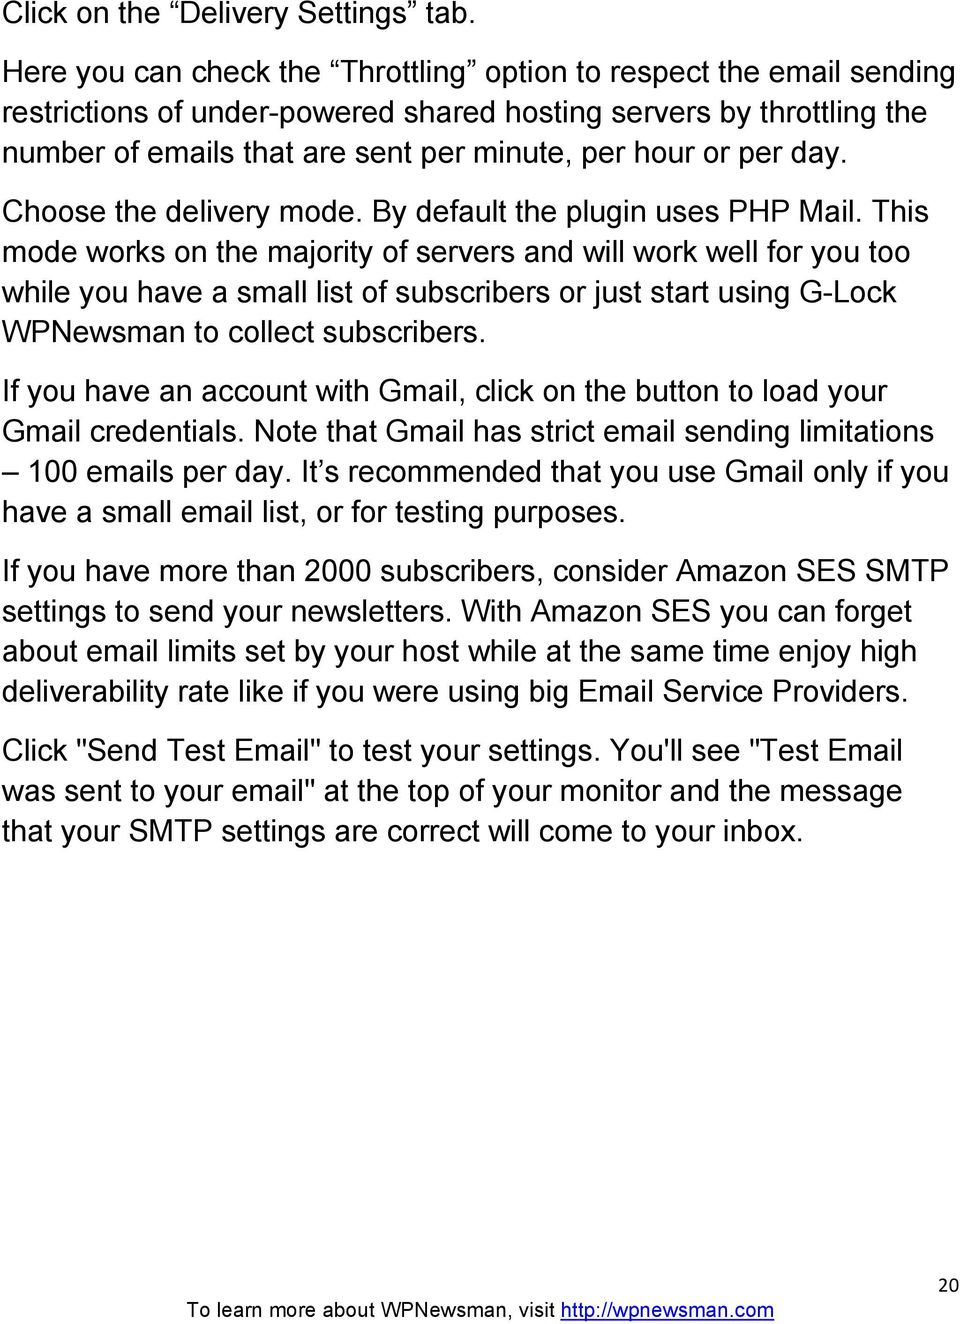 day. Choose the delivery mode. By default the plugin uses PHP Mail.